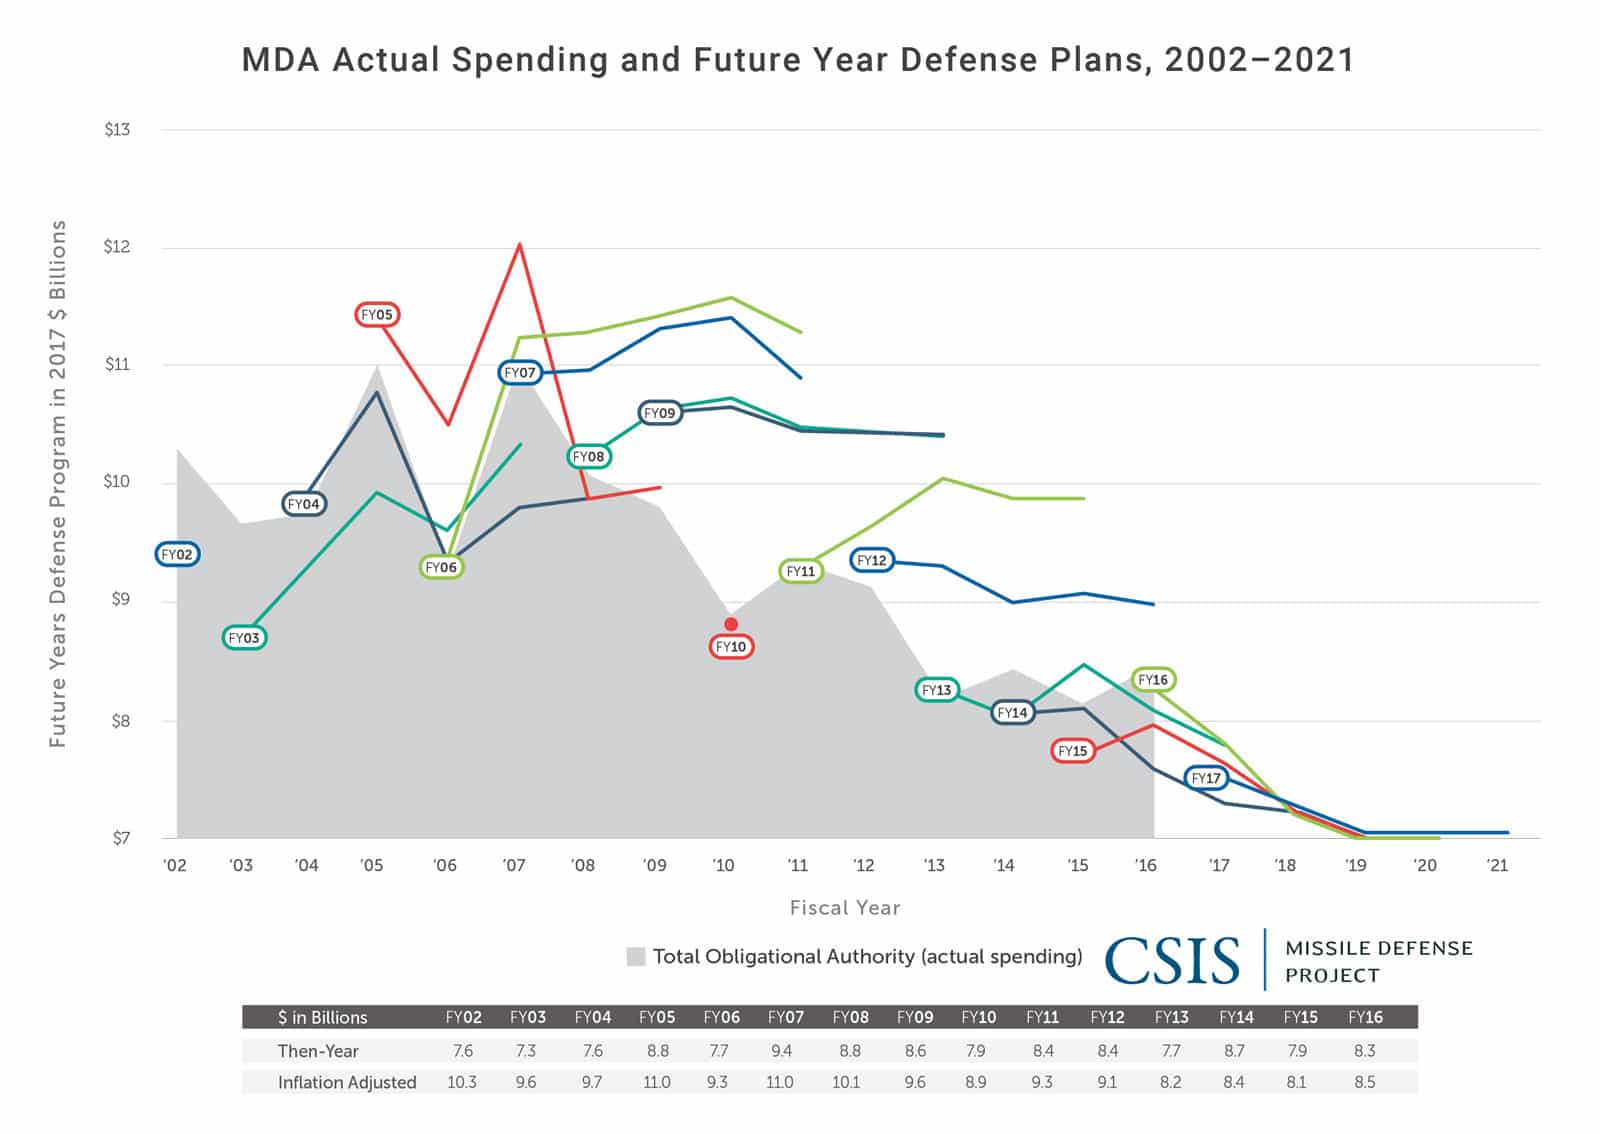 MDA Actual Spending and Future Year Defense Plans, 2002-2021